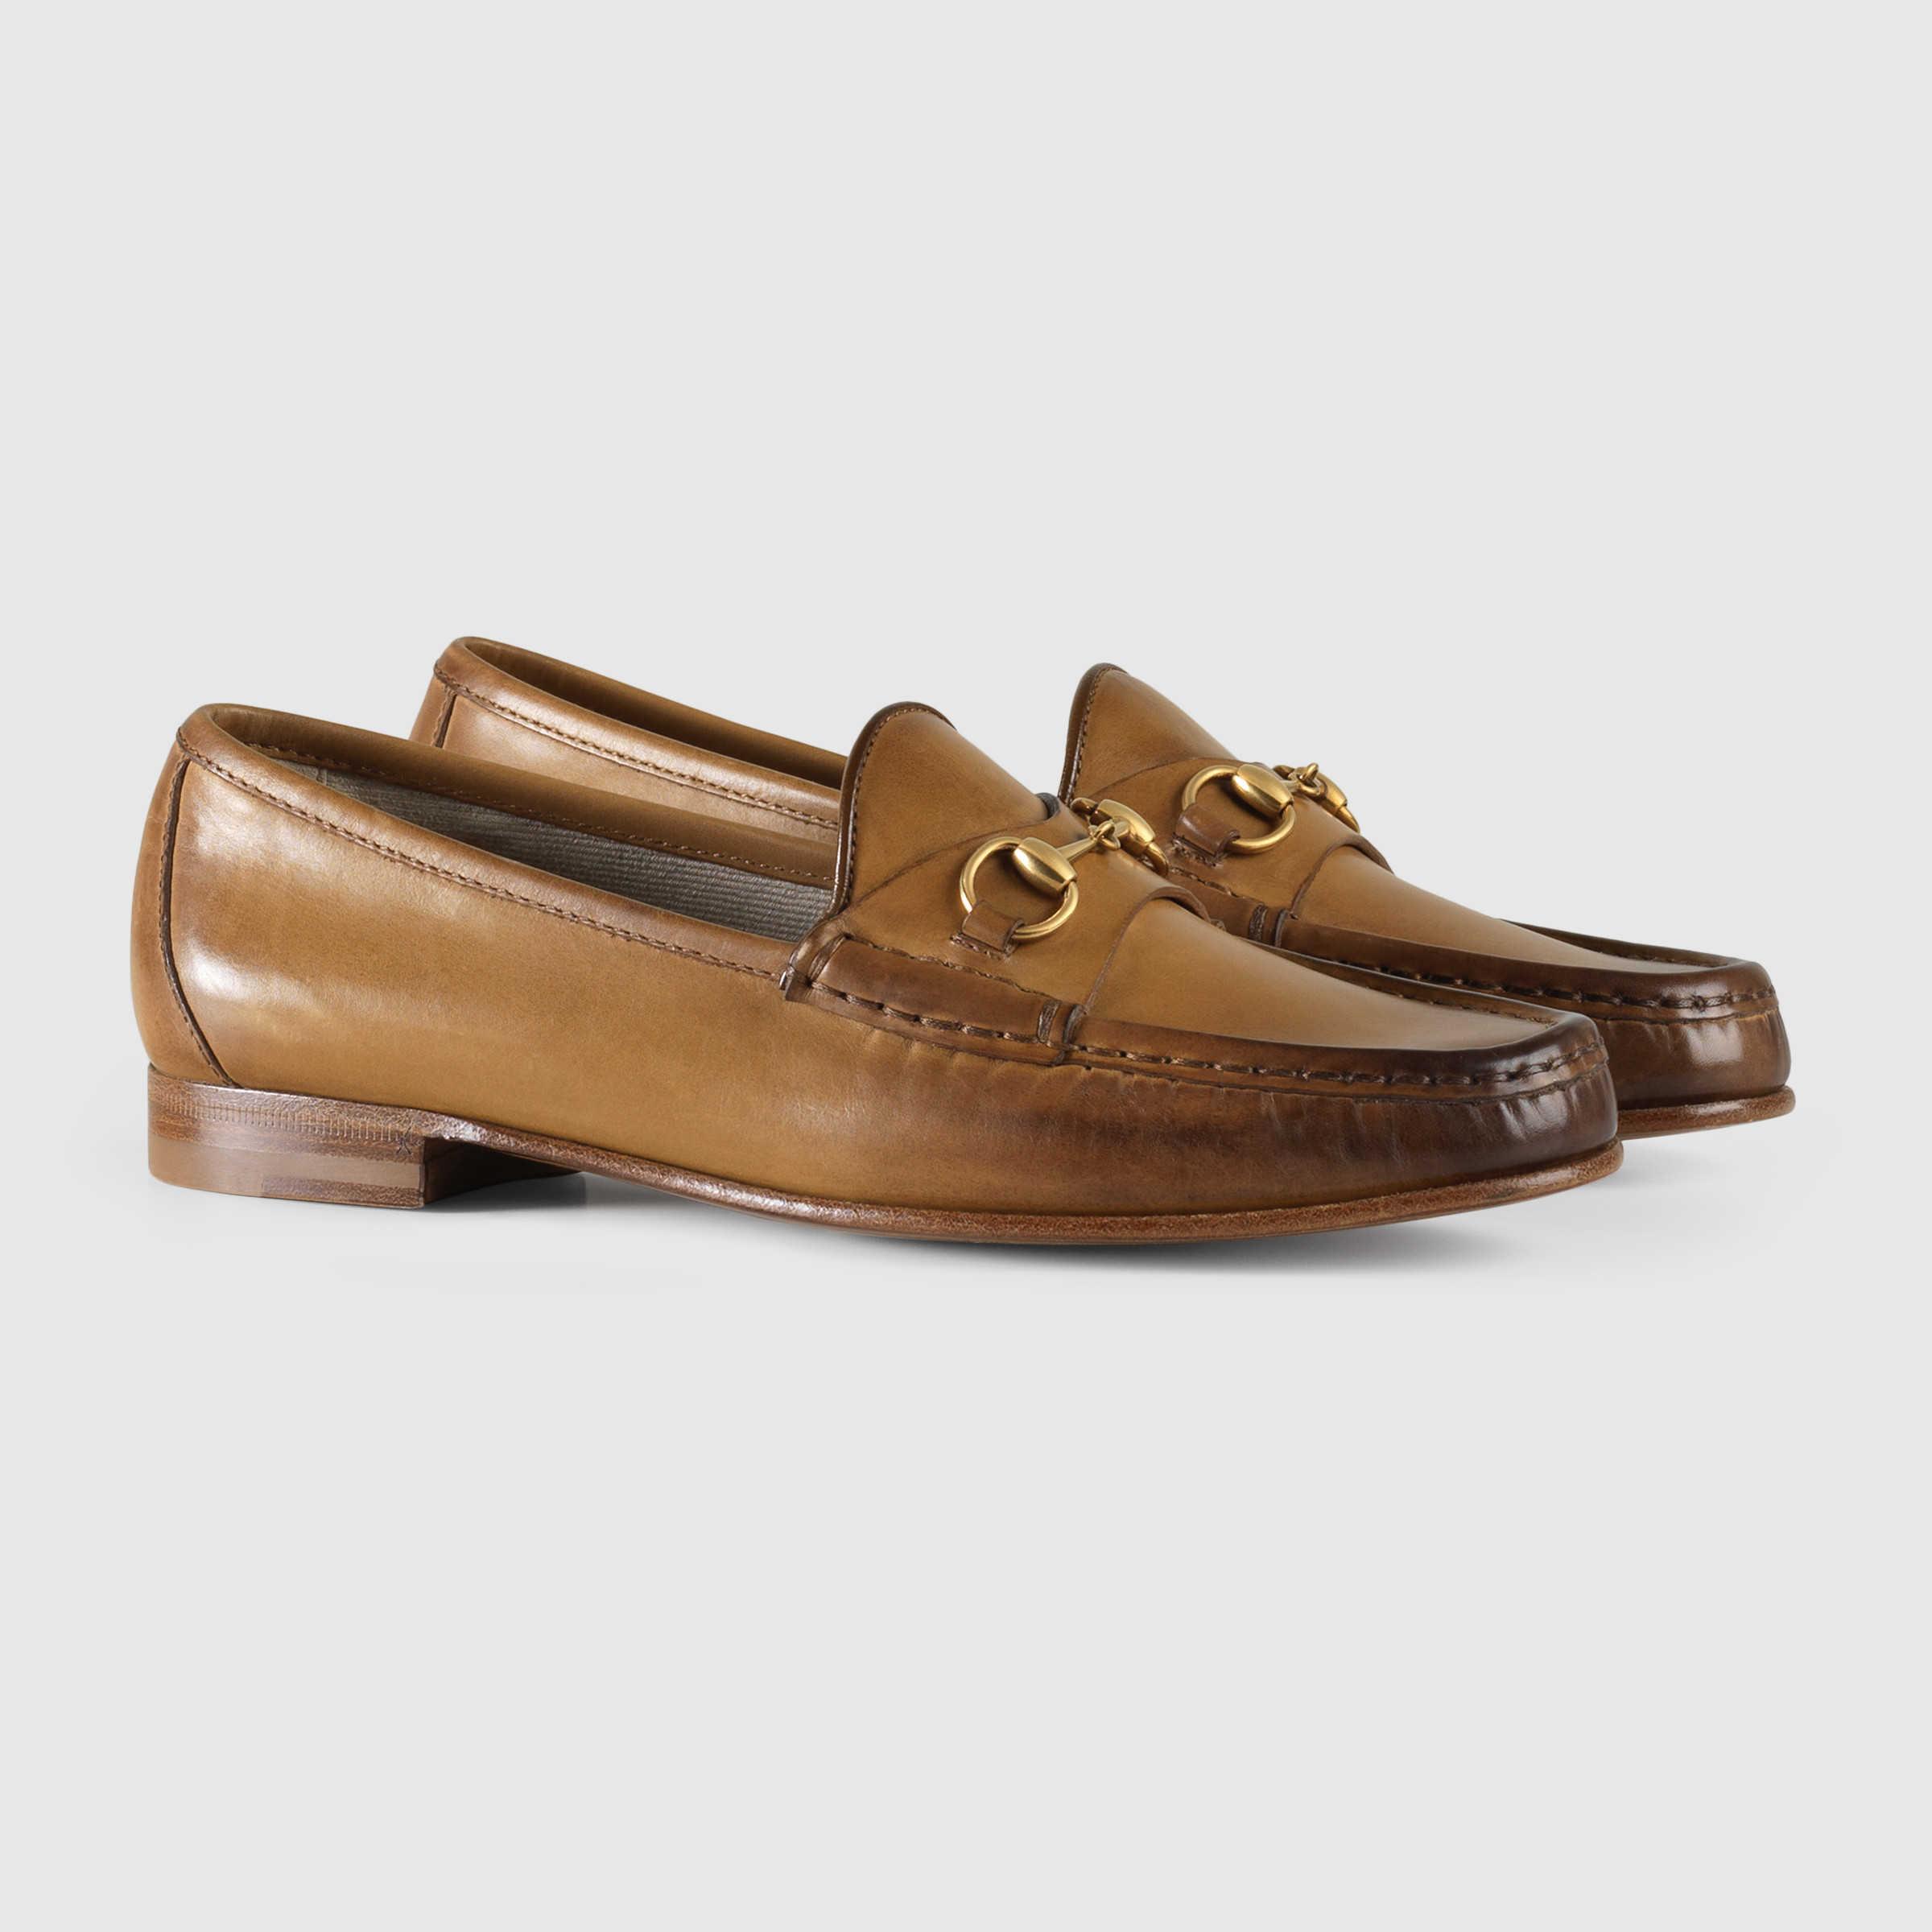 Gucci 1953 Horsebit Loafer In Leather in Brown | Lyst